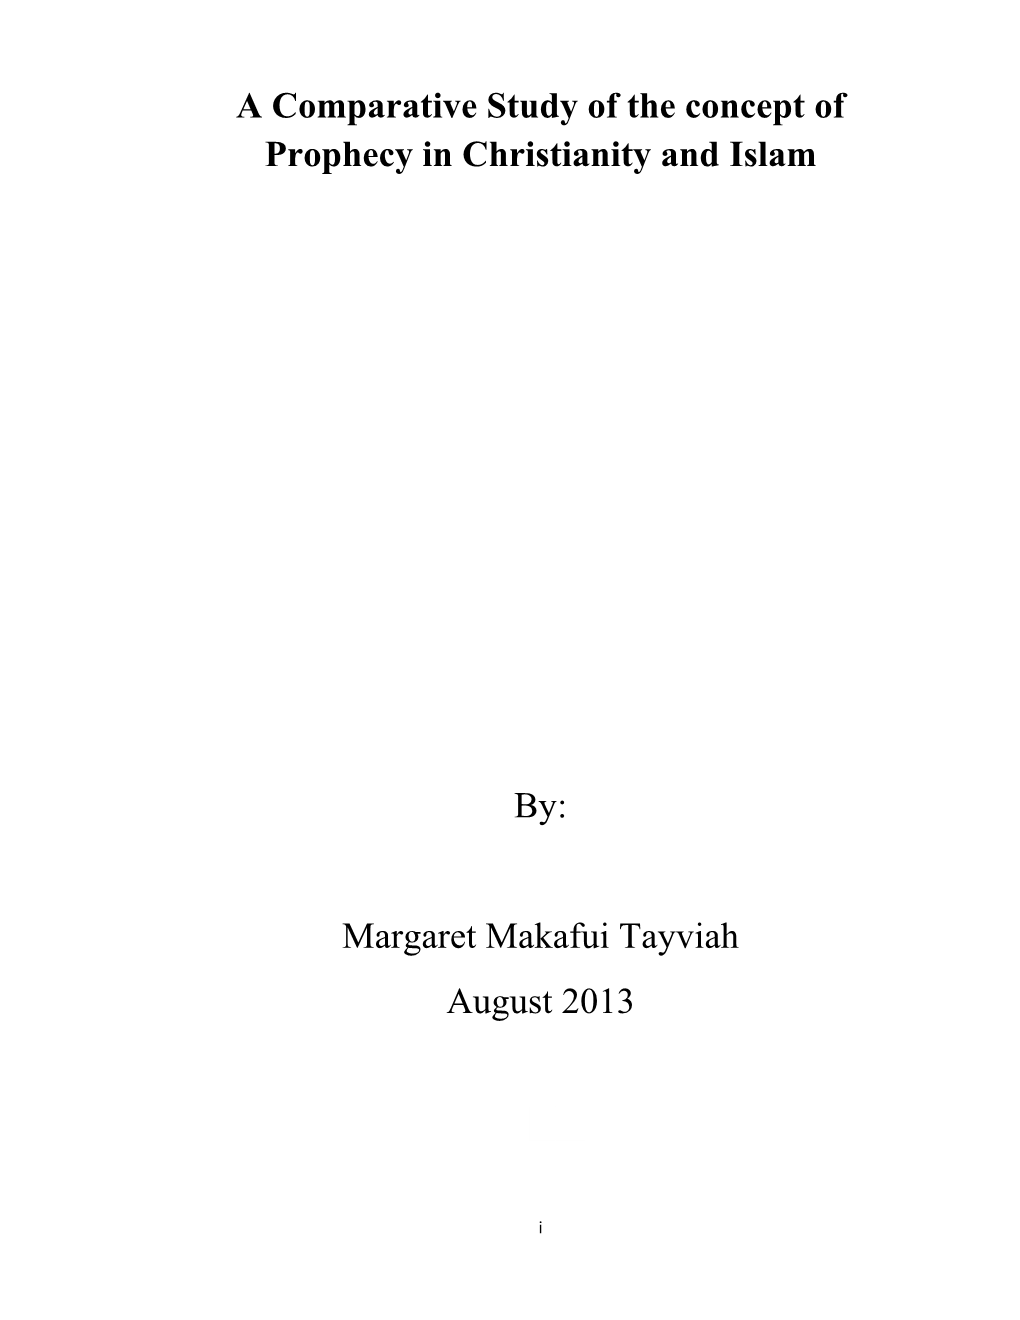 A Comparative Study of the Concept of Prophecy in Christianity and Islam